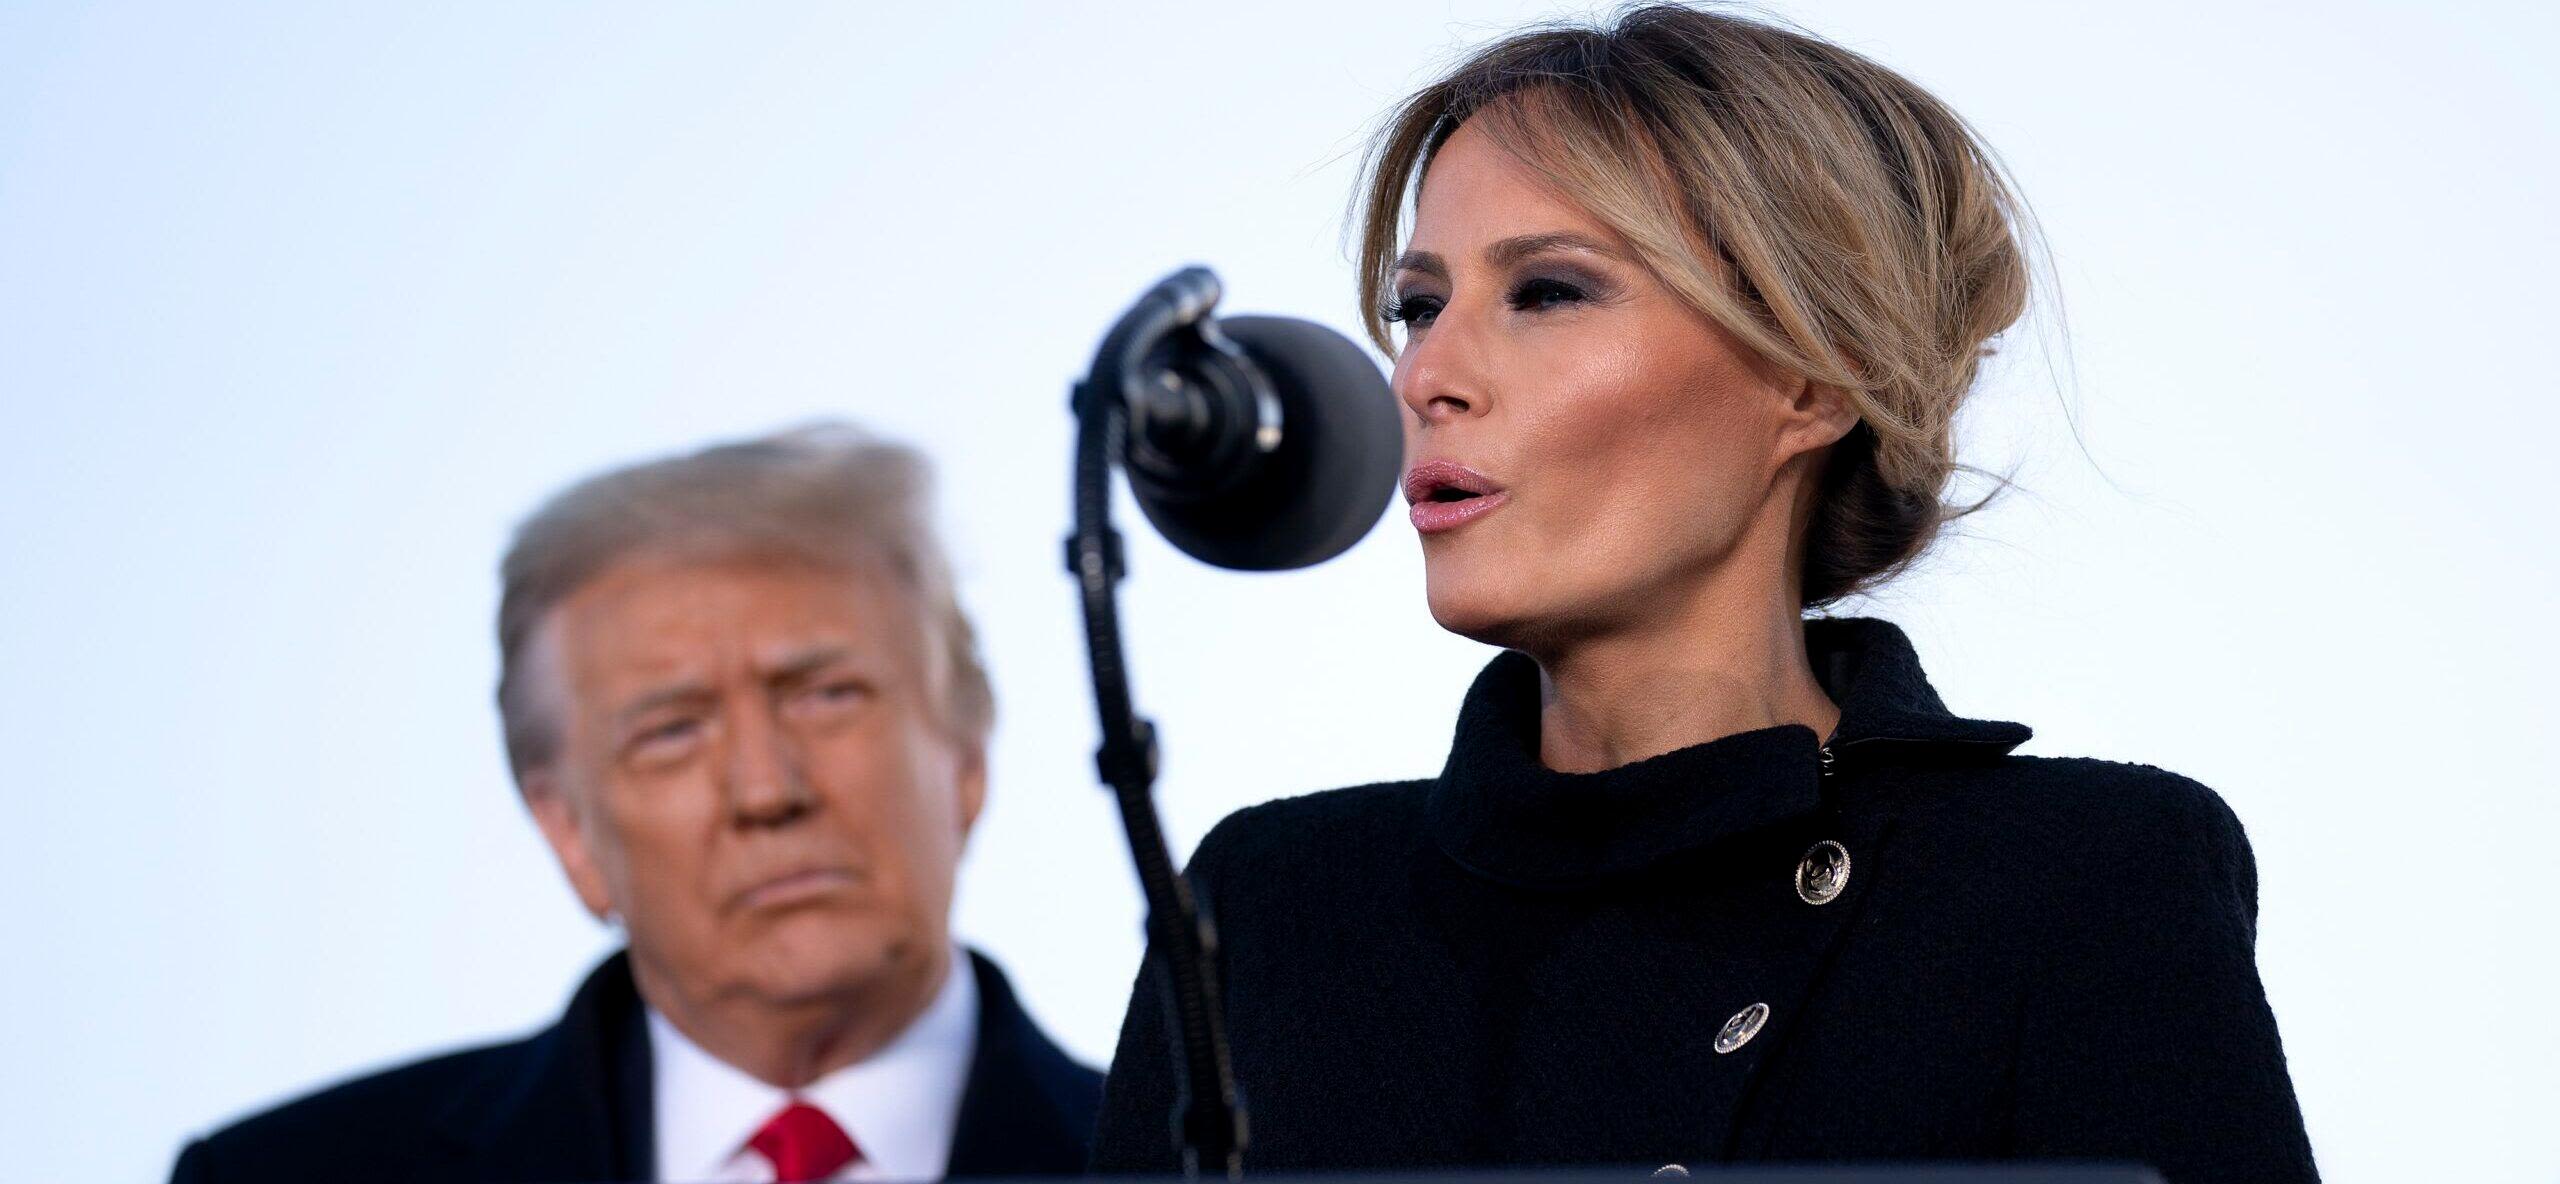 Donald Trump Speaks On The Impact Of His Hush Money Trial On Melania: 'She Sees That I'm Fighting'